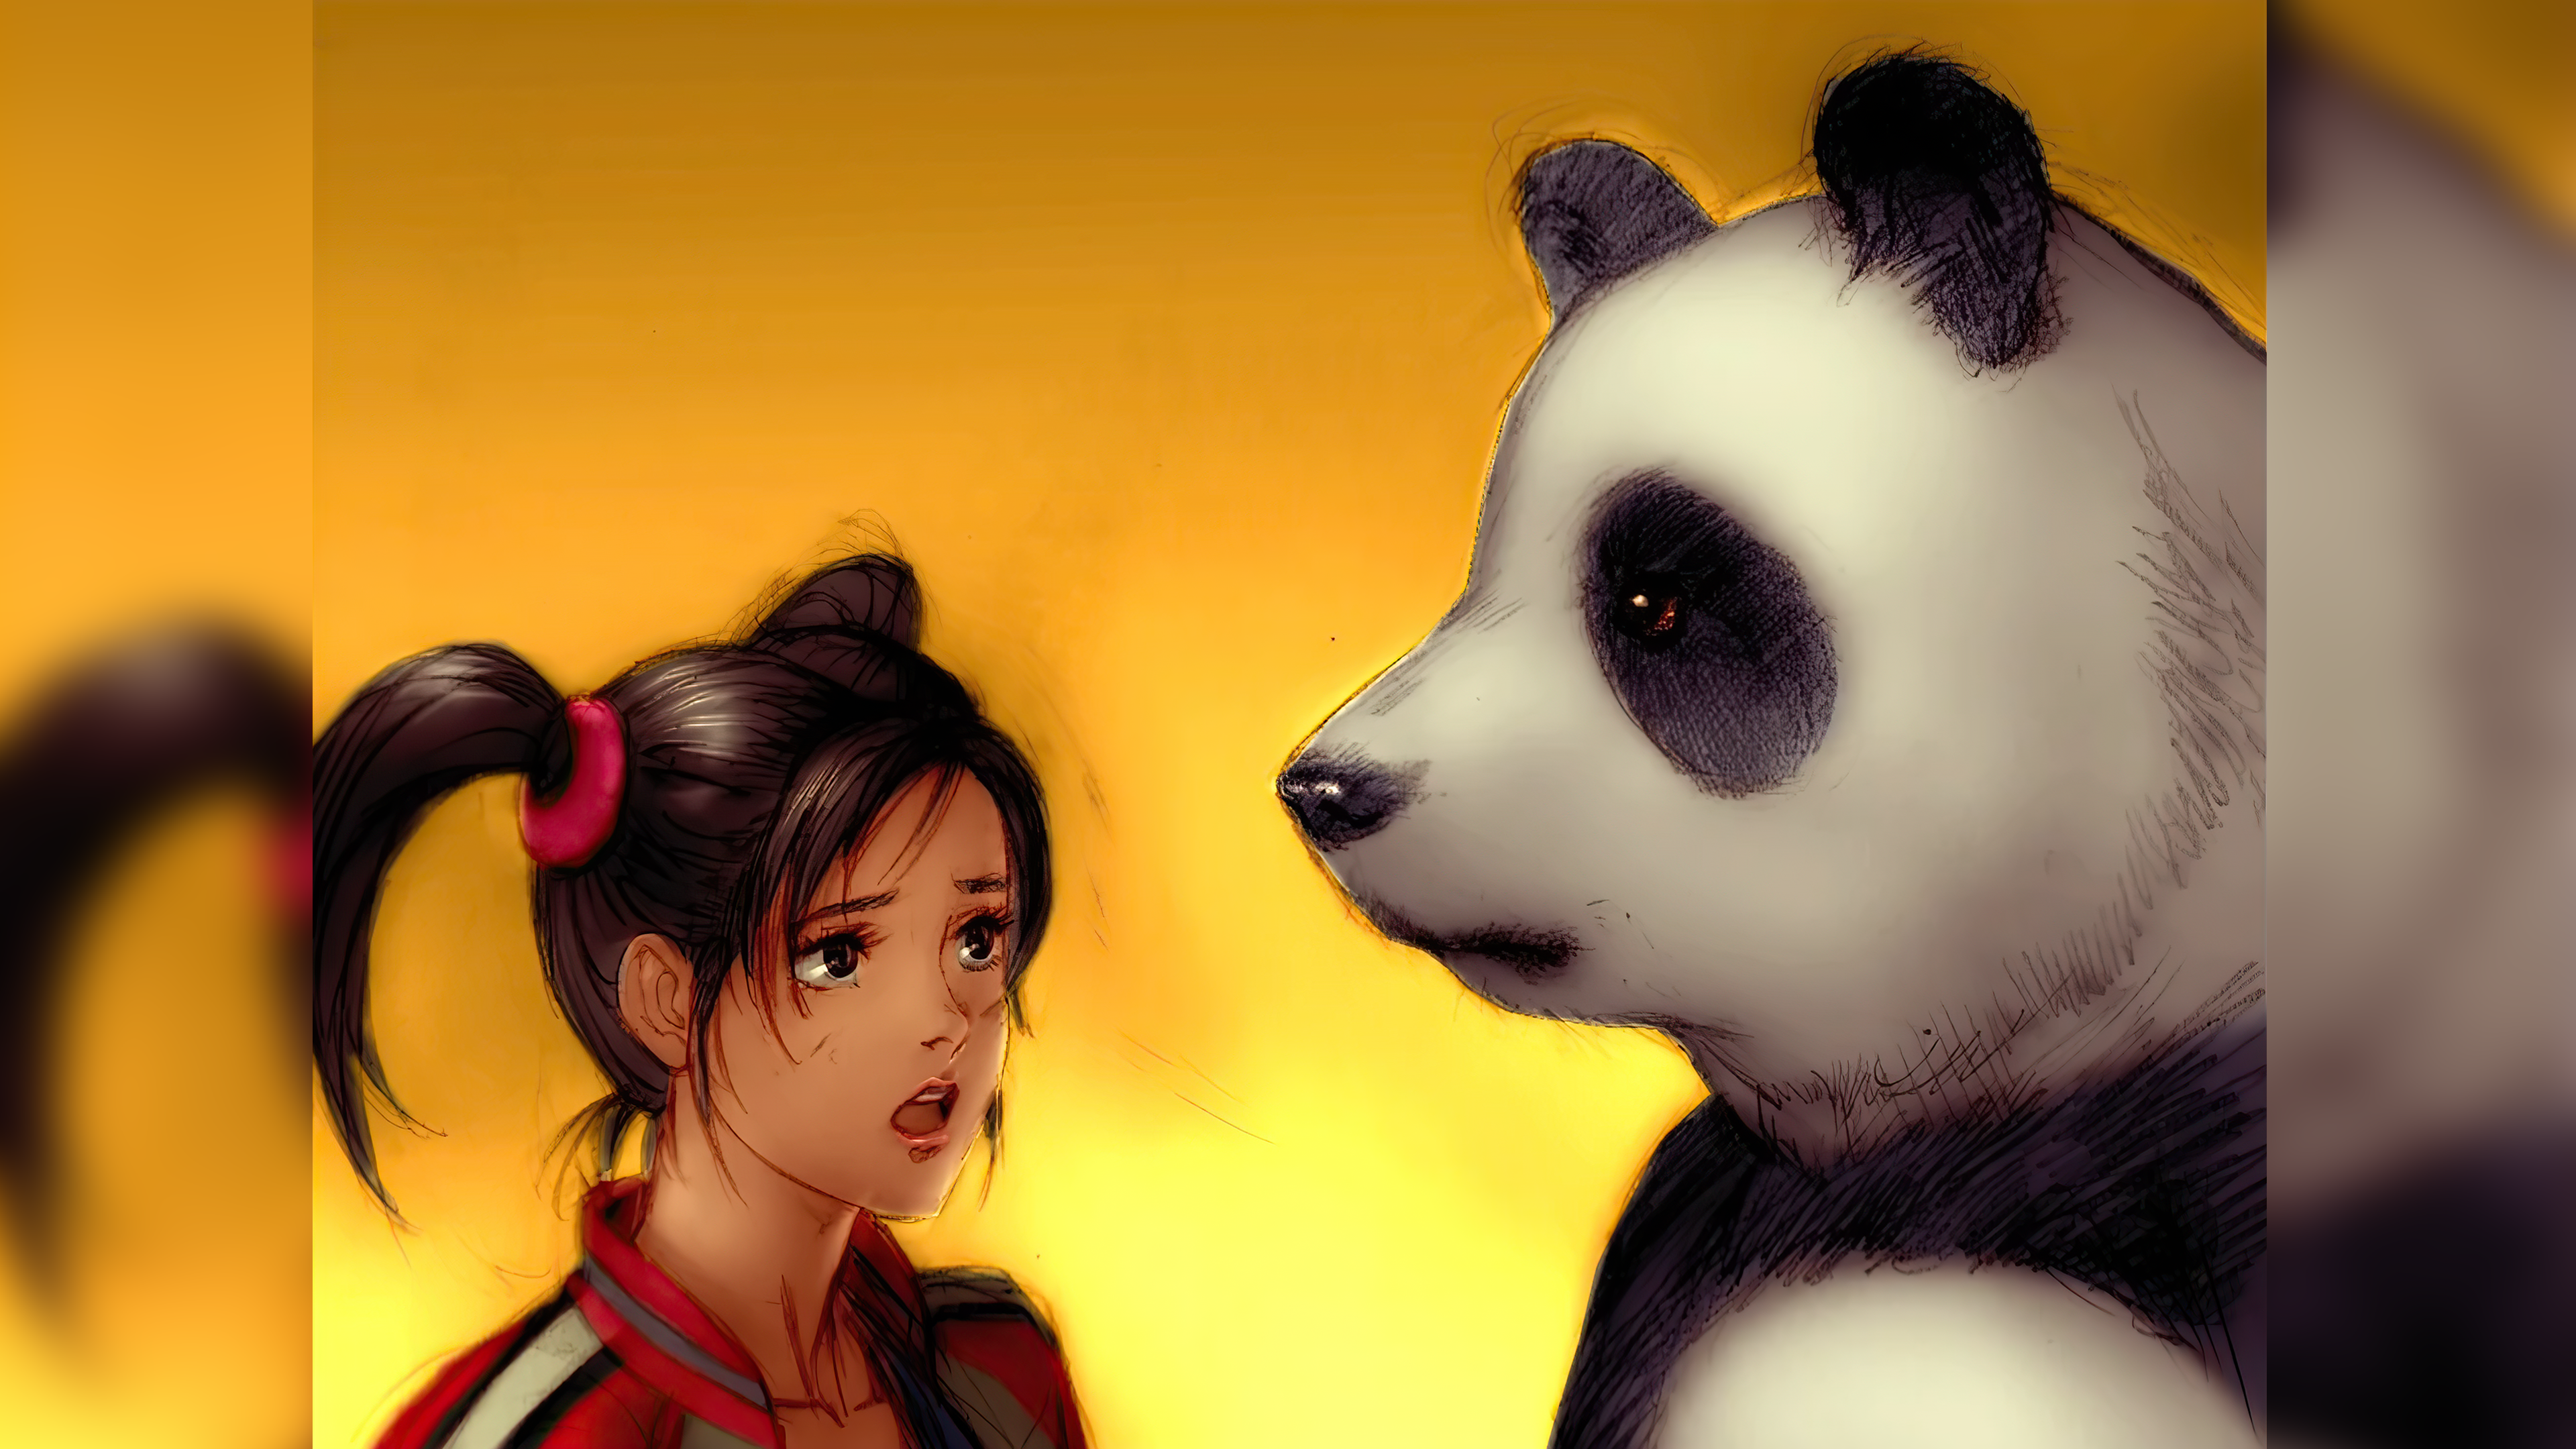 4k Wallpaper Panda And Ling by TheI3arracuda on DeviantArt